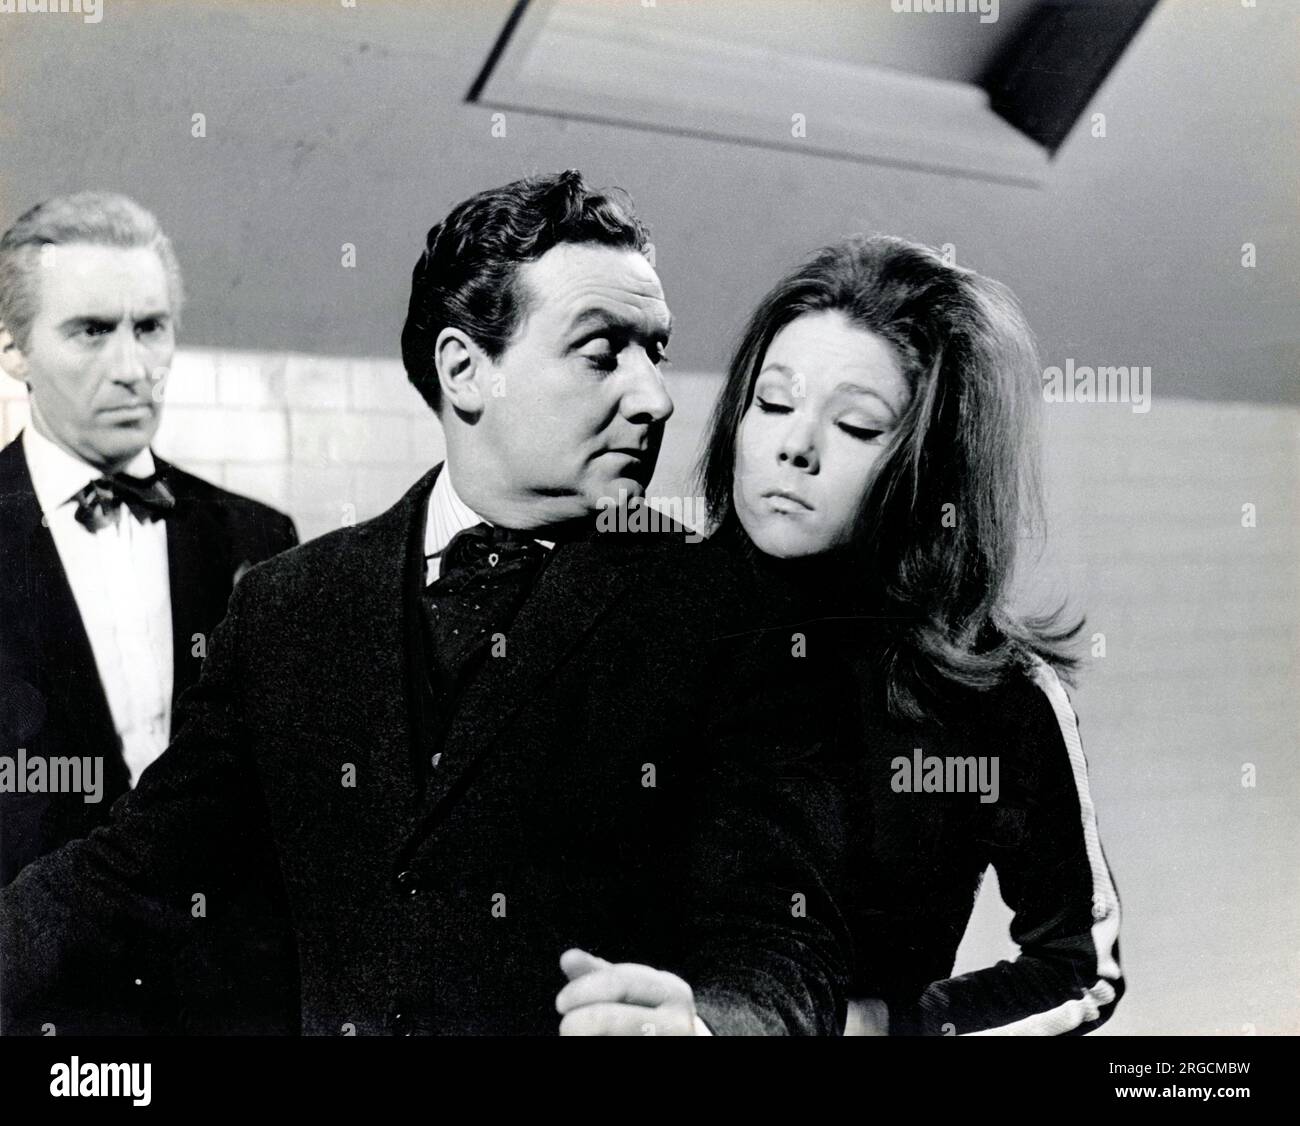 Emma Peel of 'The Avengers', with John Steed and one other played by Diana Rigg, Patrick McNee and an unknown actor, respectively. Stock Photo